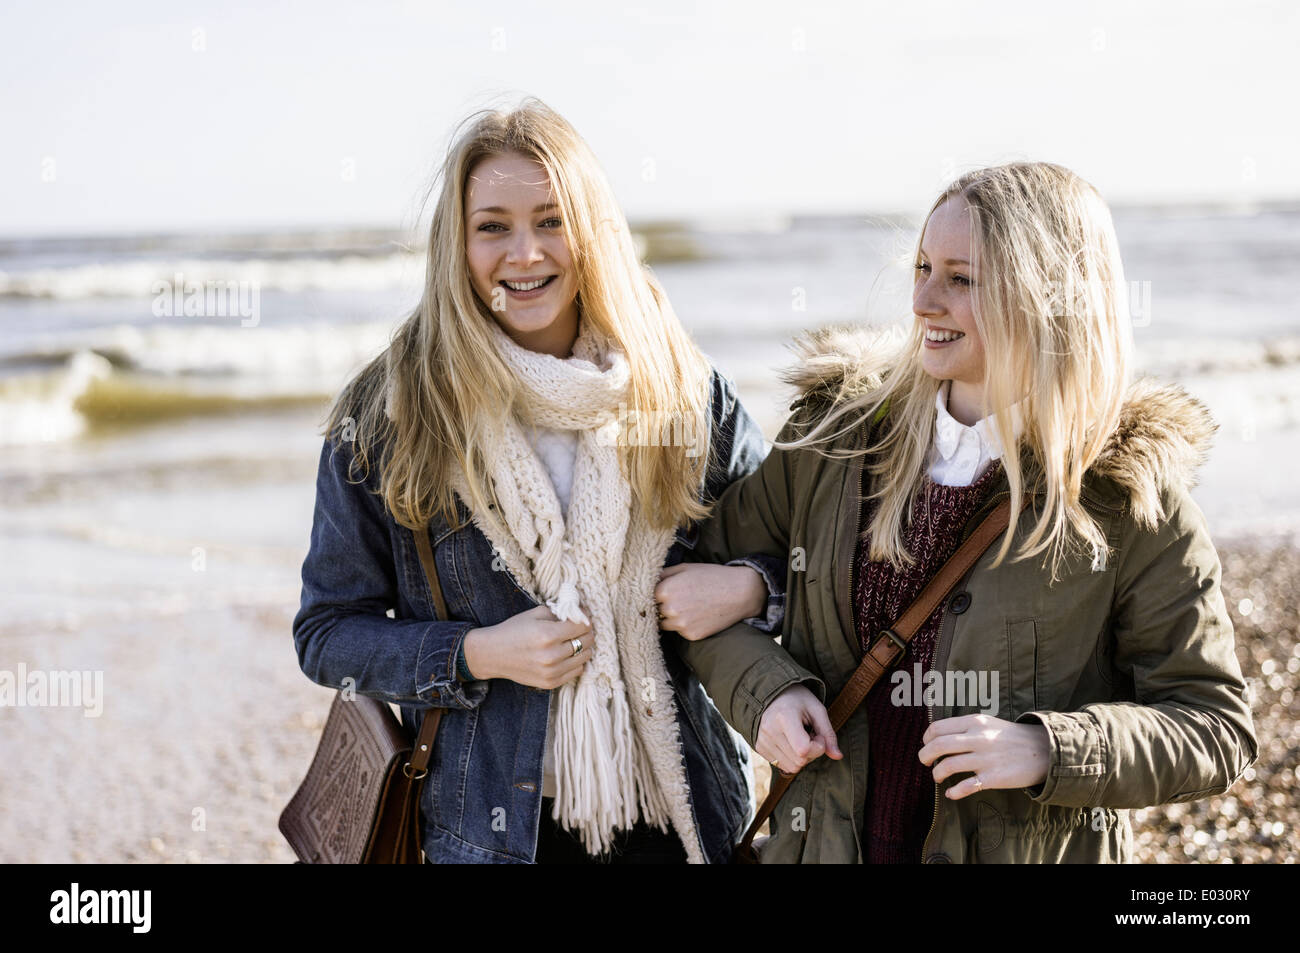 Two young girls on a beach in winter. Stock Photo